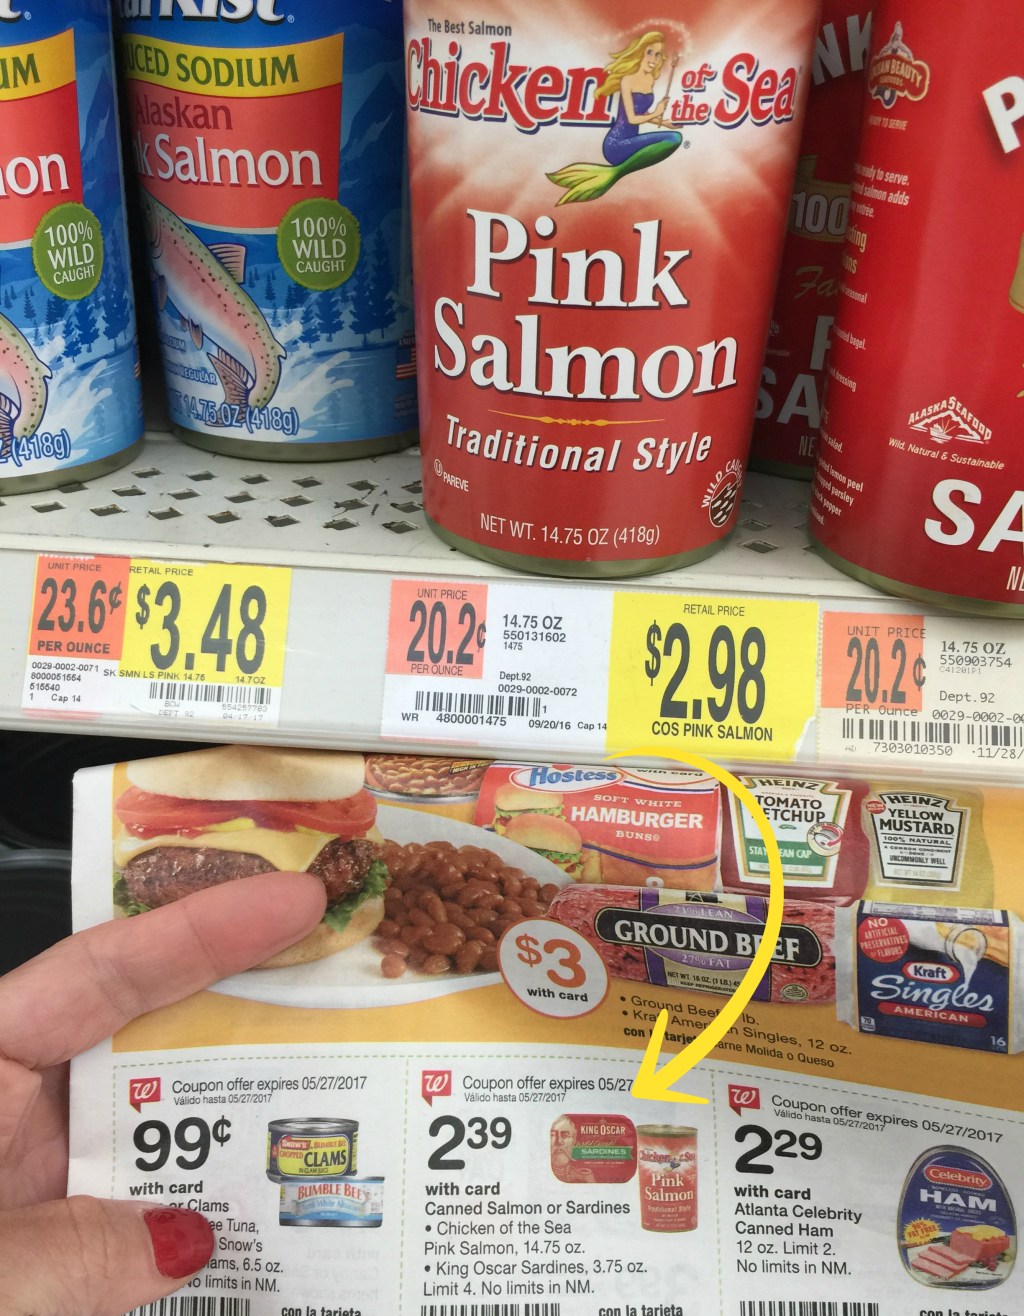 18-money-saving-secrets-for-shopping-and-using-coupons-at-walmart